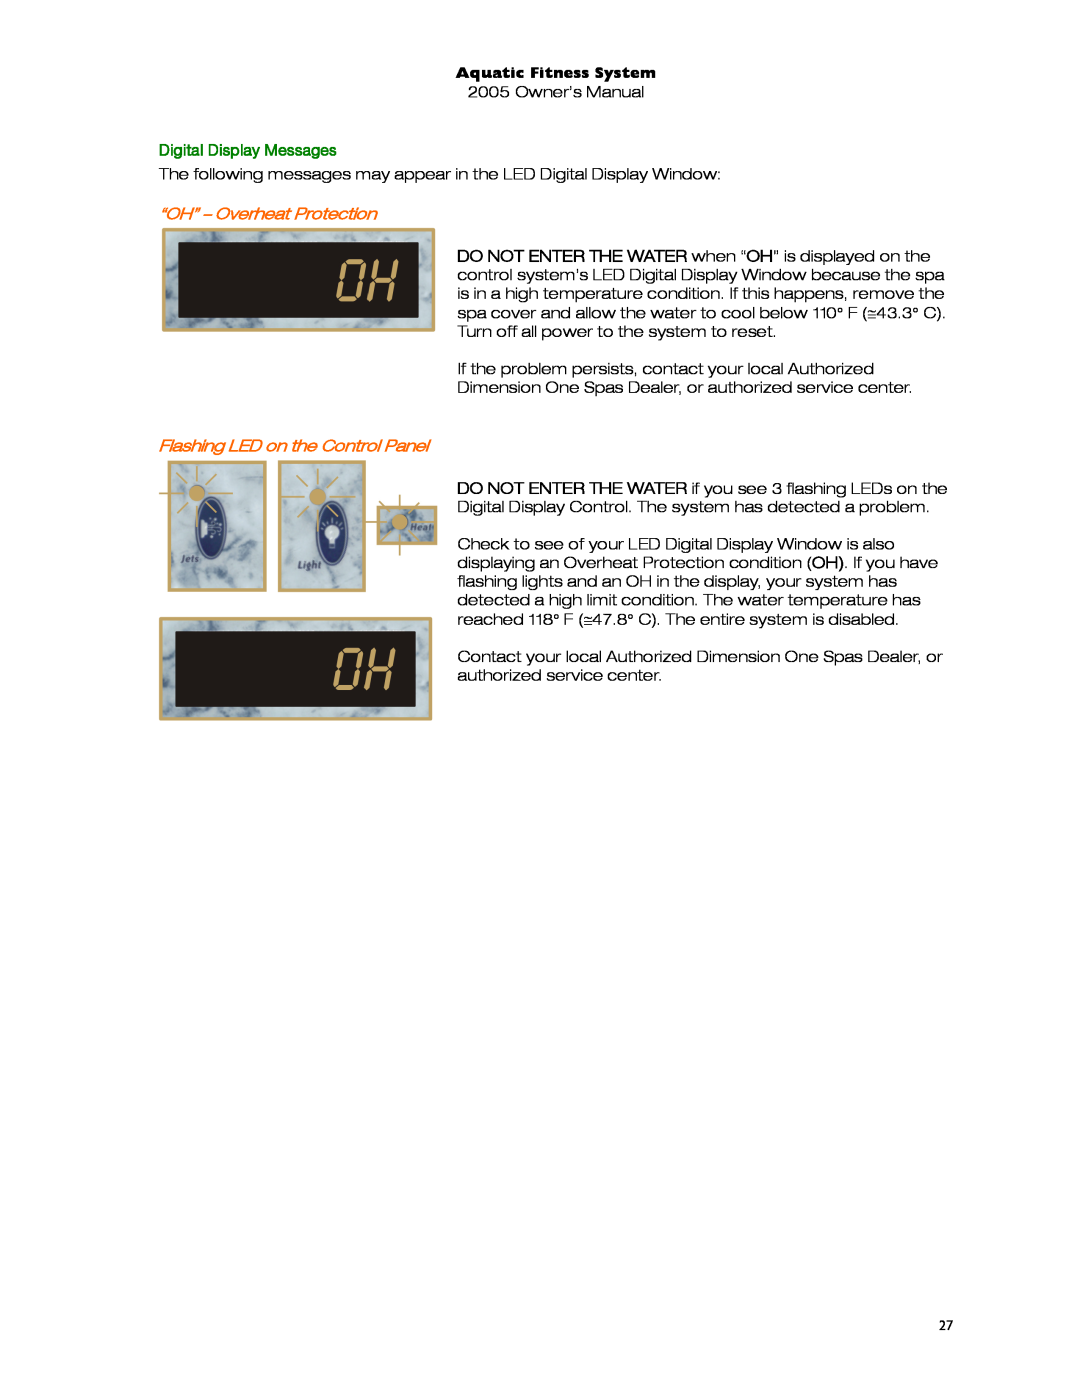 Dimension One Spas 01513-192 manual “OH” – Overheat Protection, Flashing LED on the Control Panel, Aquatic Fitness System 